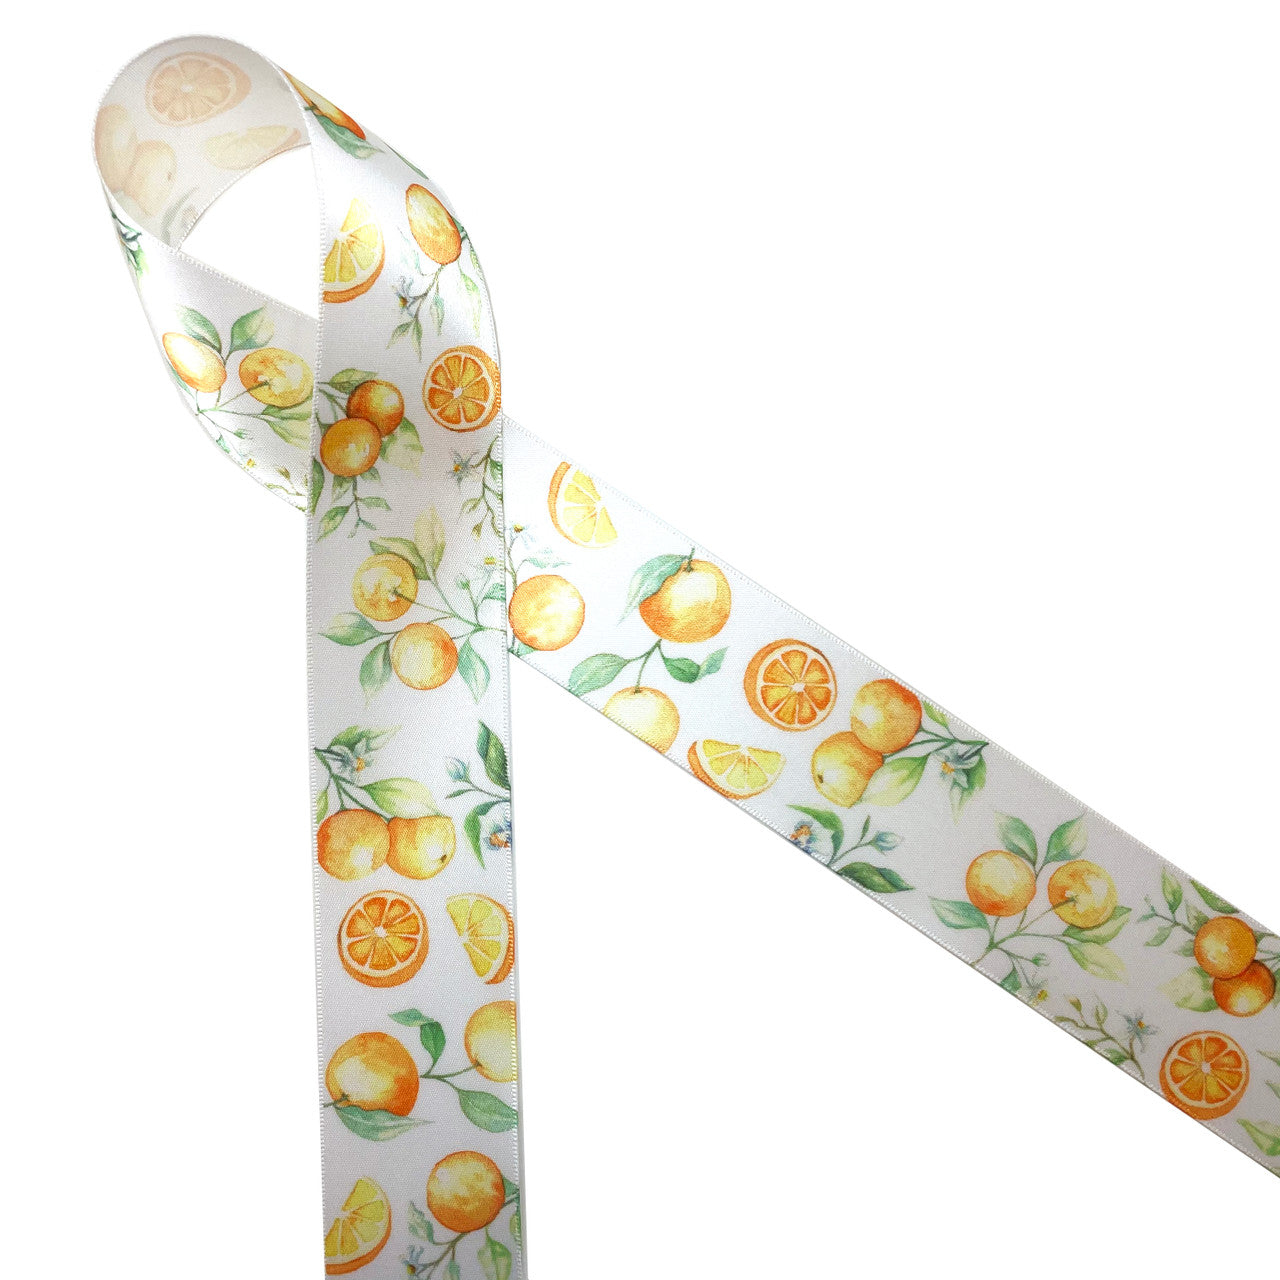 Oranges whole, slices and with their leaves printed on 1.5" white single face satin ribbon is ideal for quilting, sewing, crafts , wreath making and so much more. This is a great ribbon for party decor, bridal showers, hair bows and hat bands. All our ribbon is designed and printed in the USA